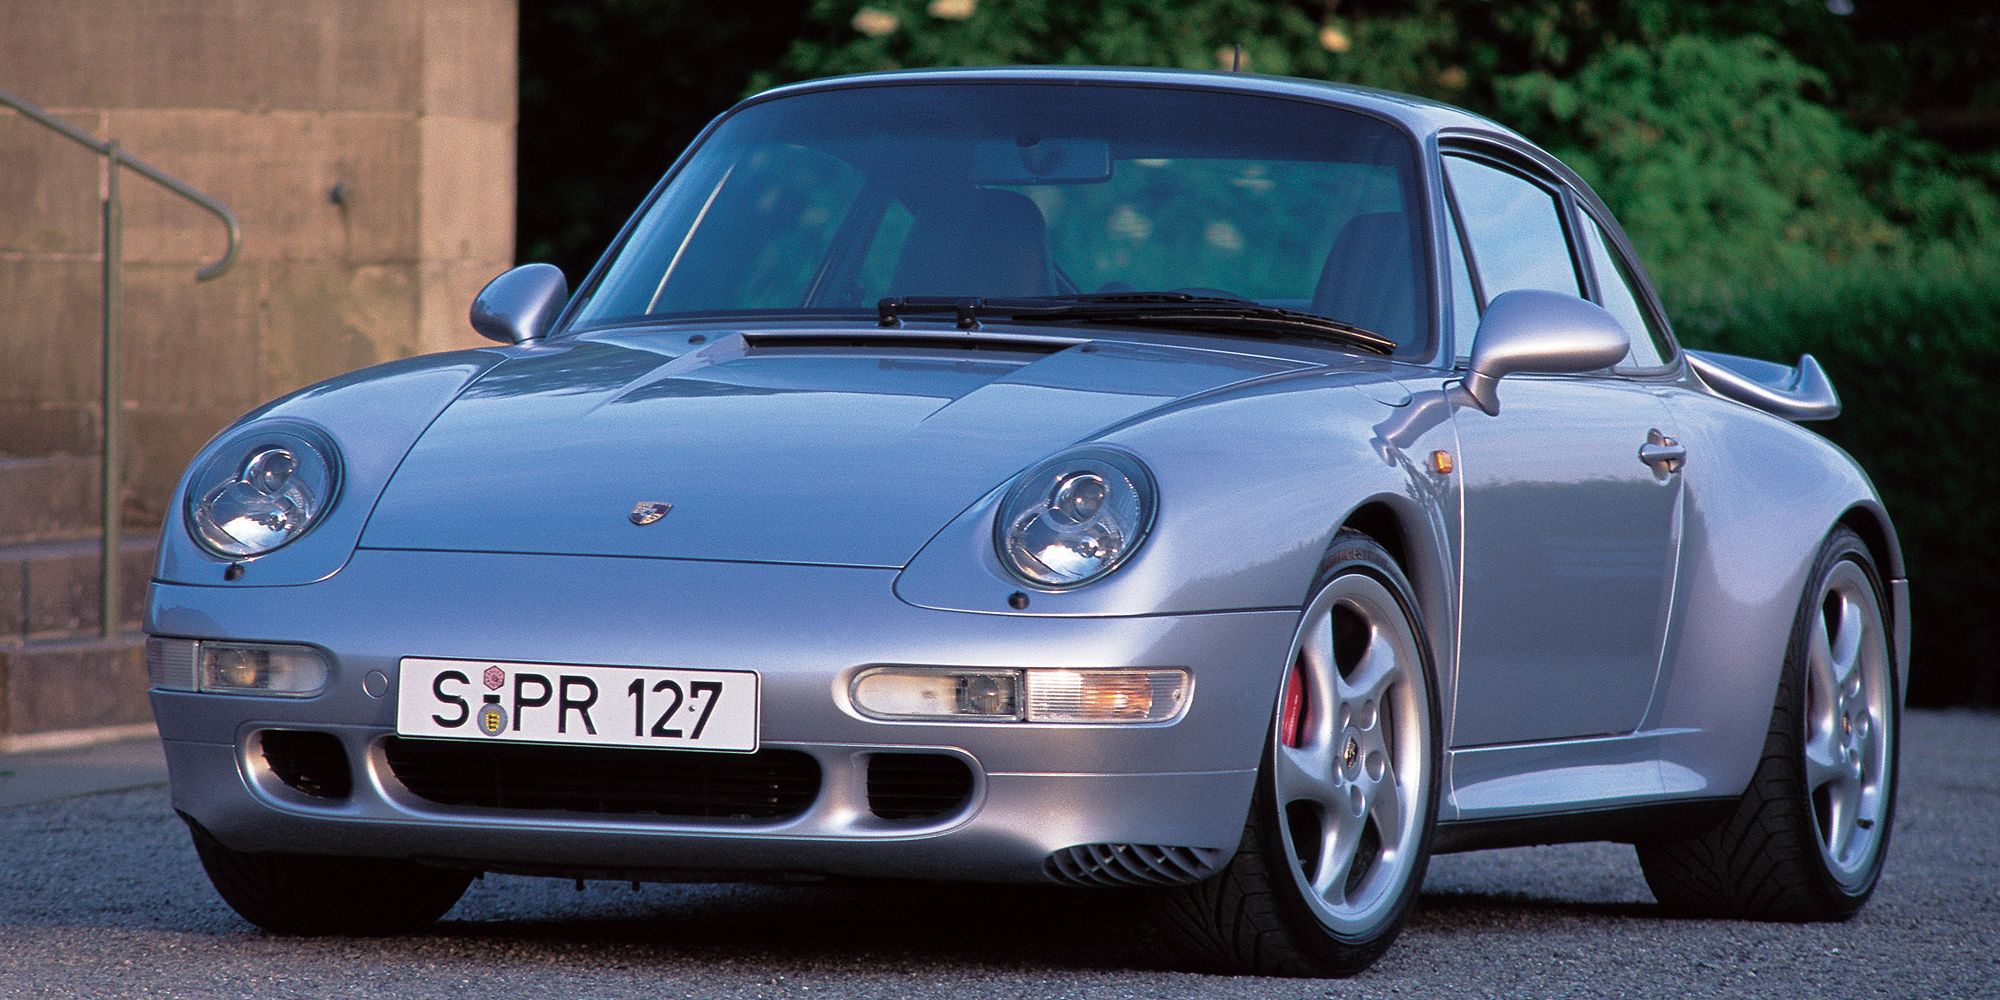 The front of the 993 Turbo S